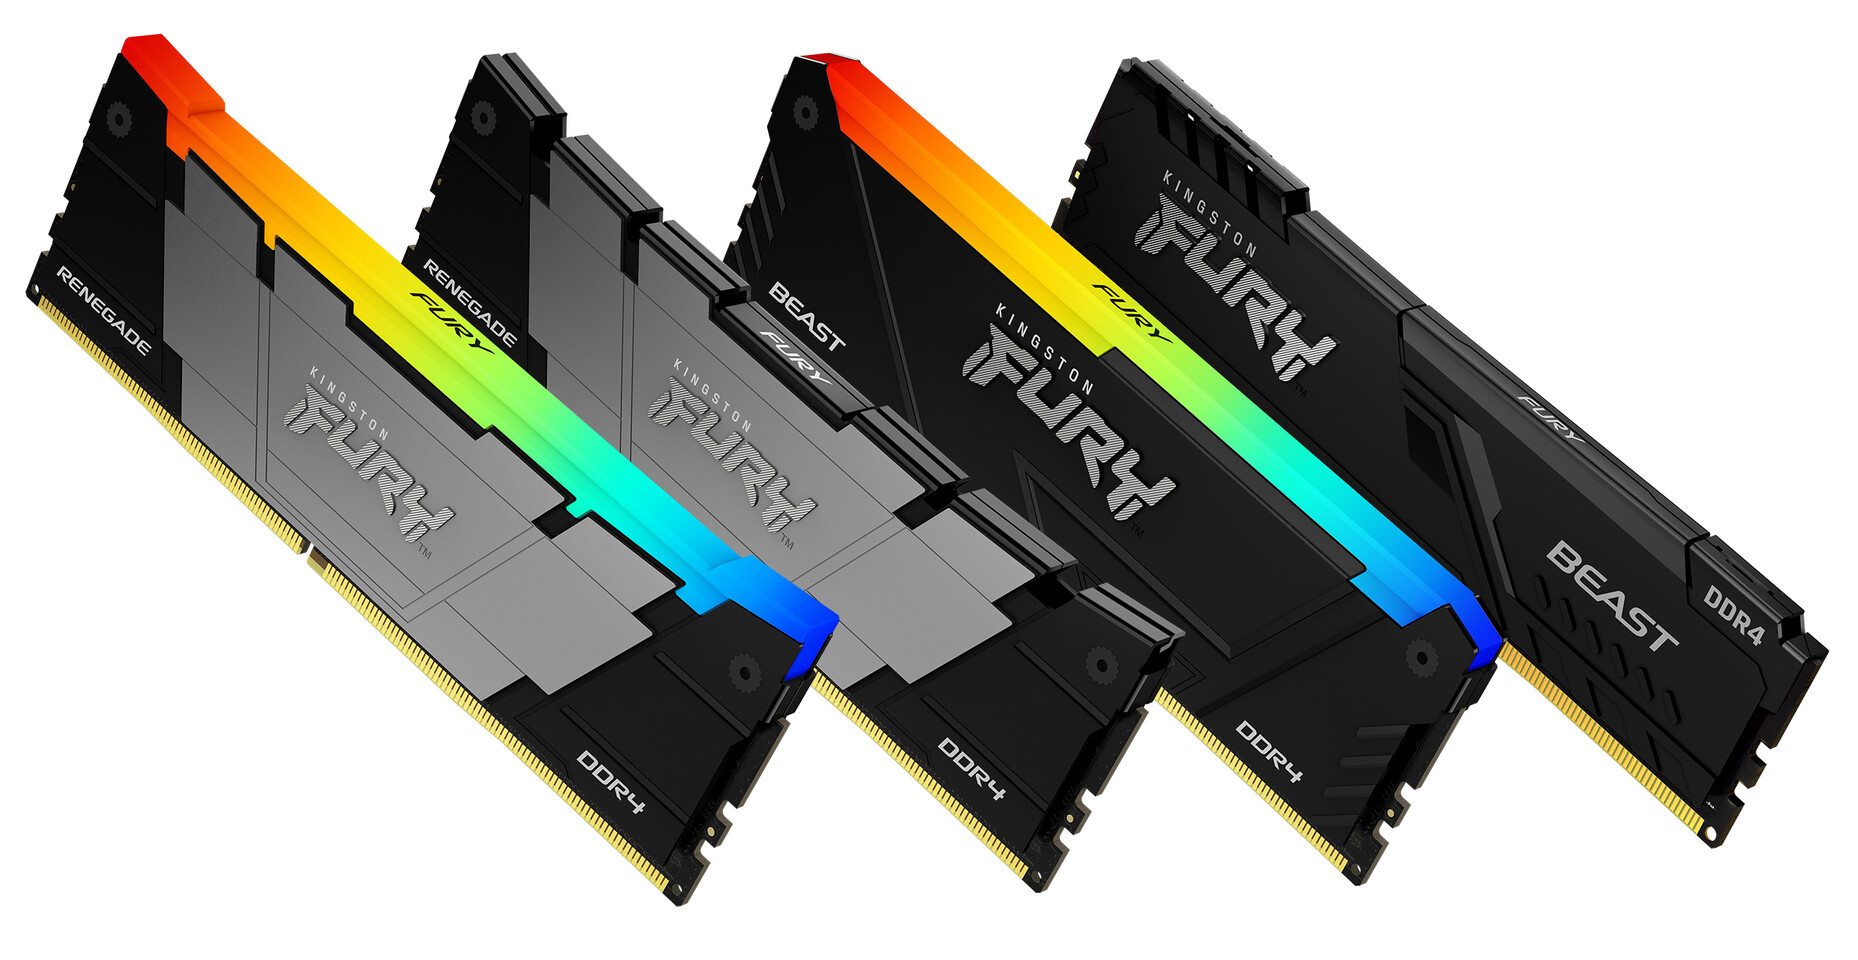 Kingston Fury Ddr4 Udimms Get A New Look